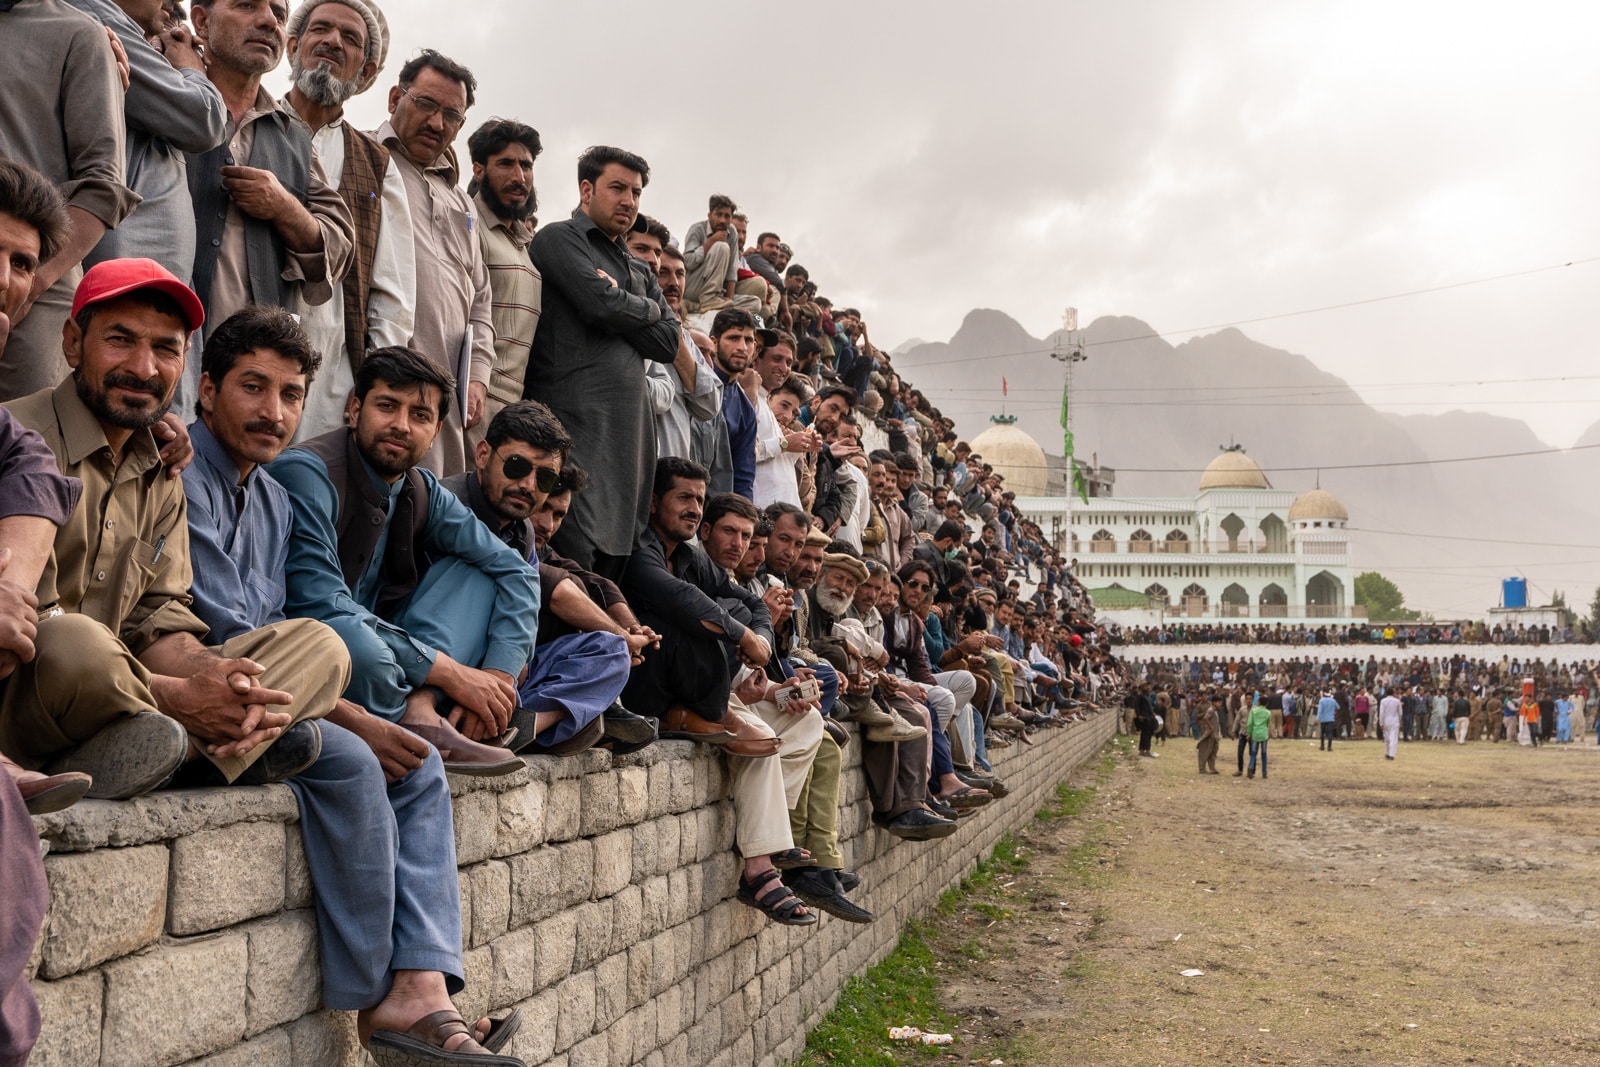 Men staring at a polo match in Gilgit, Pakistan